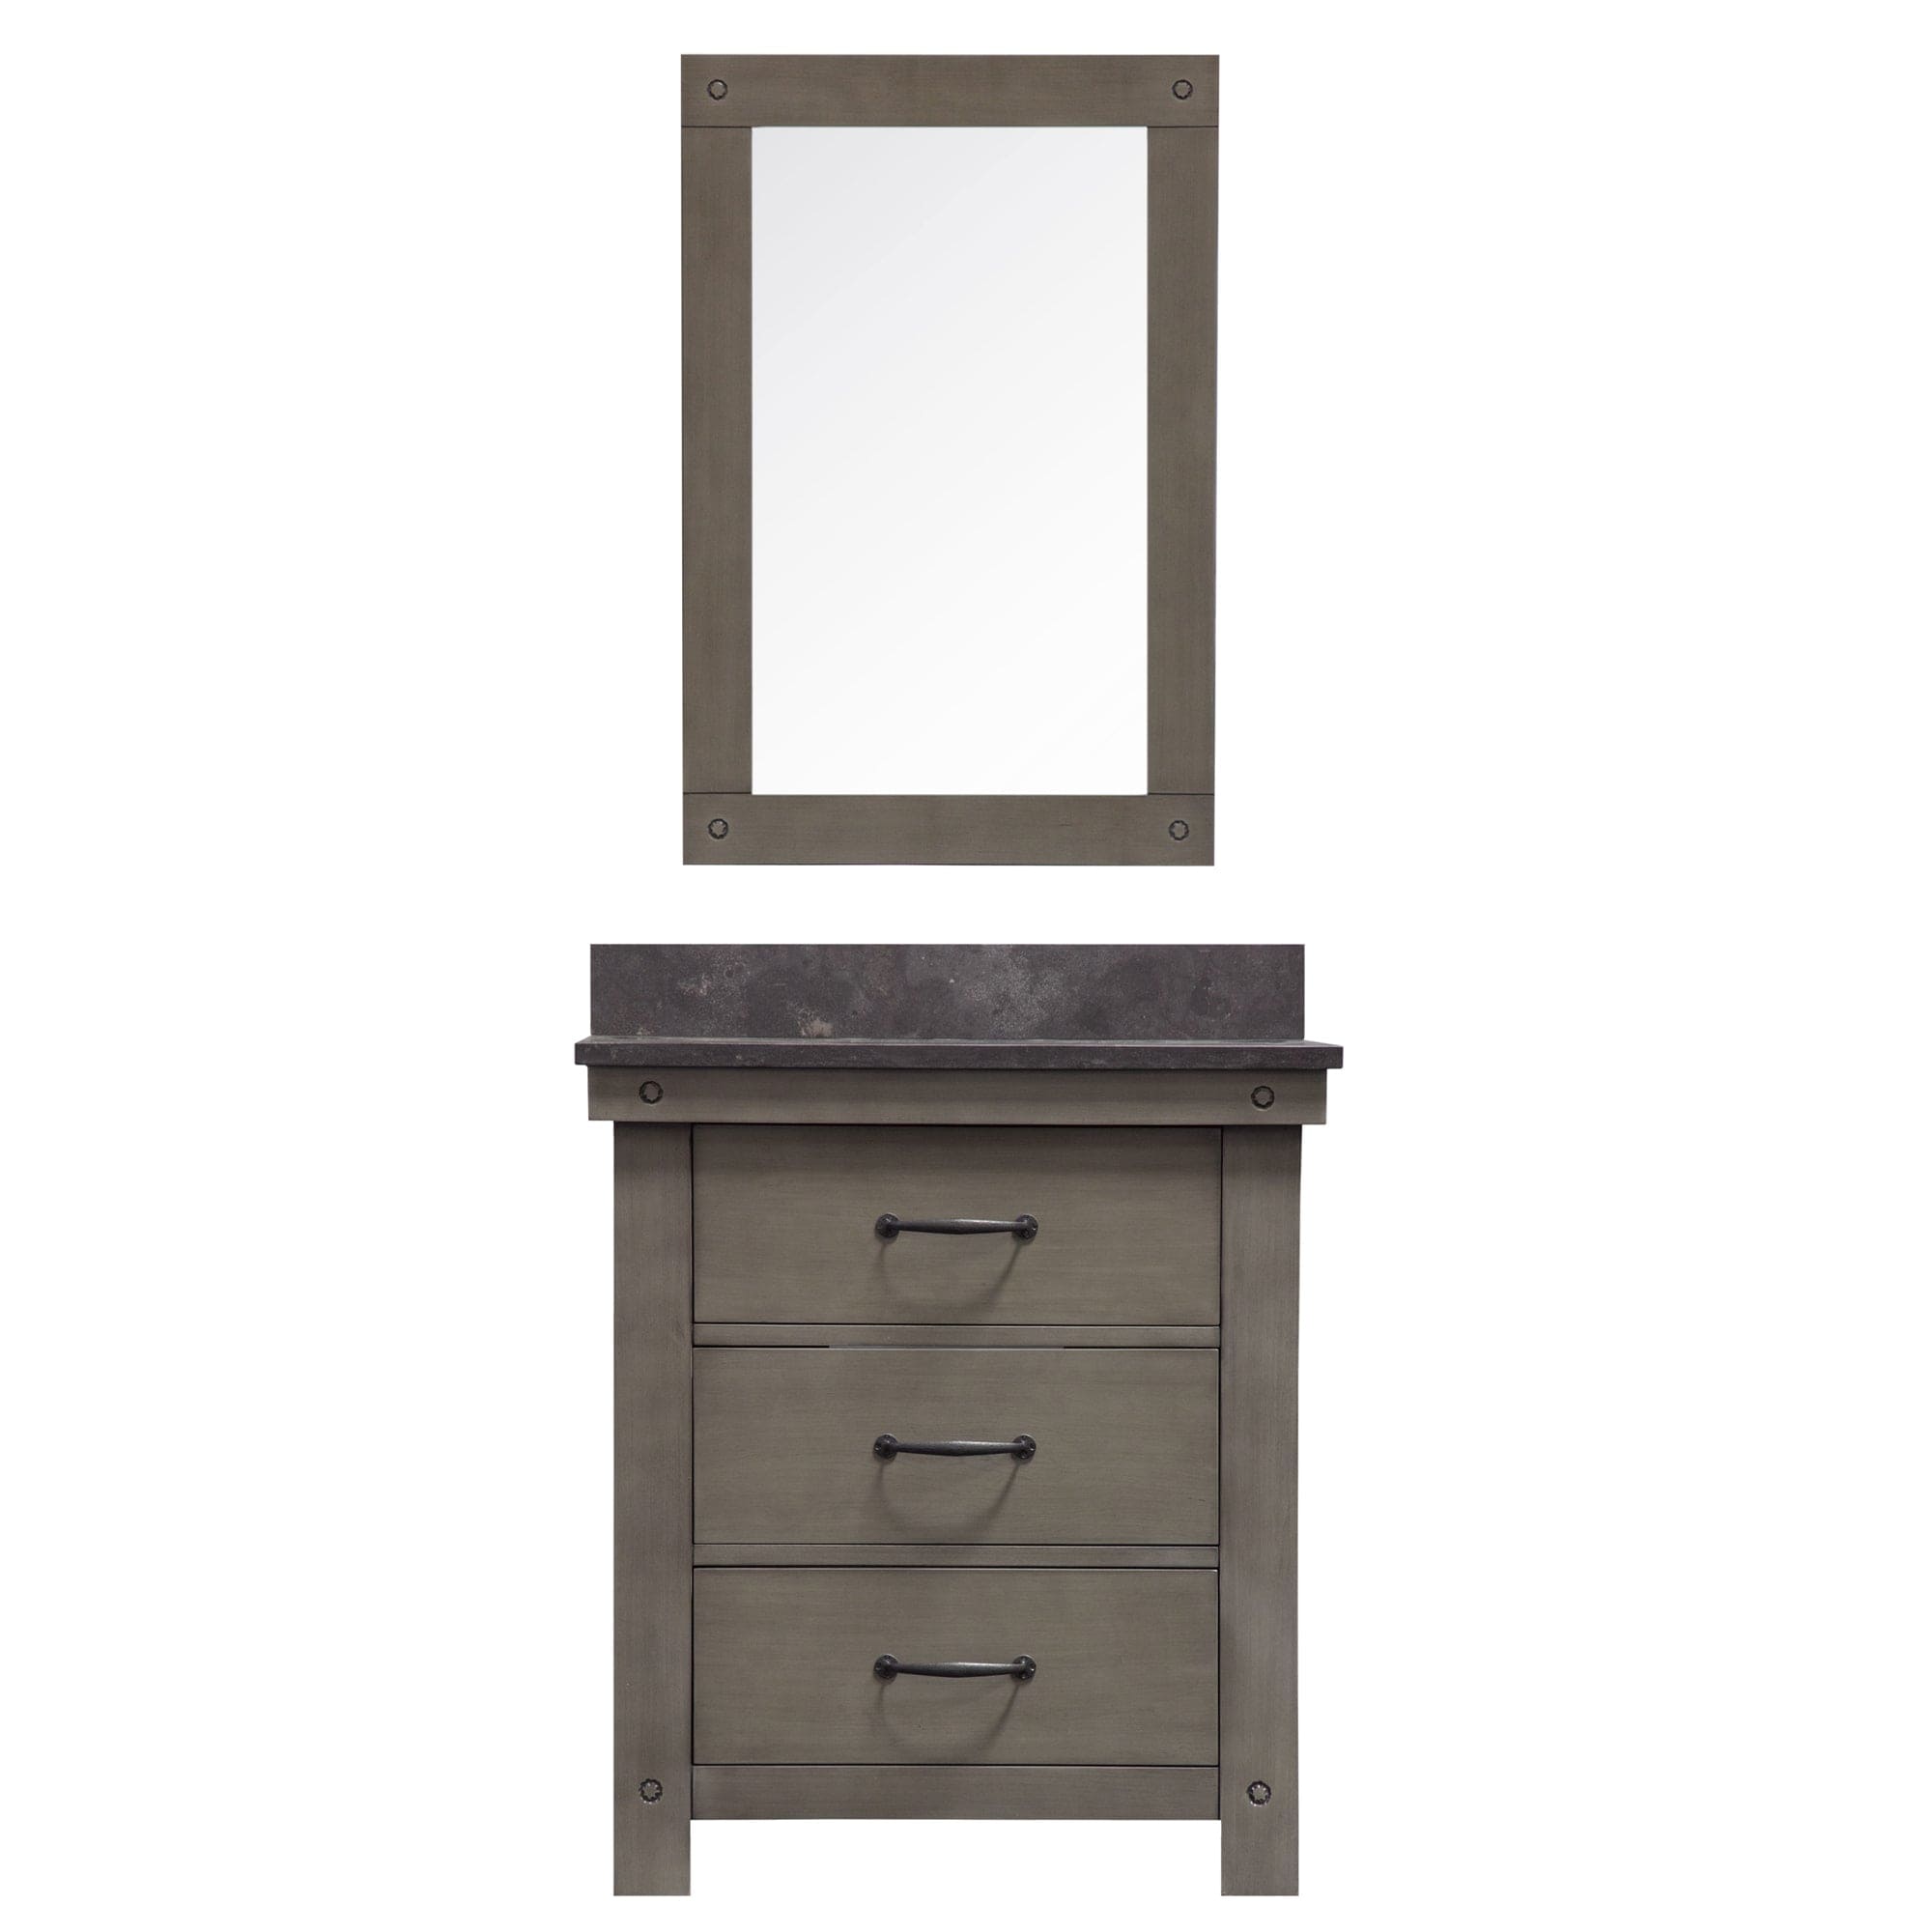 30 Inch Grizzle Grey Single Sink Bathroom Vanity With Mirror And Faucet With Blue Limestone Counter Top From The ABERDEEN Collection - Molaix732030749627Bathroom VanitiesAB30BL03GG-A24BX1203